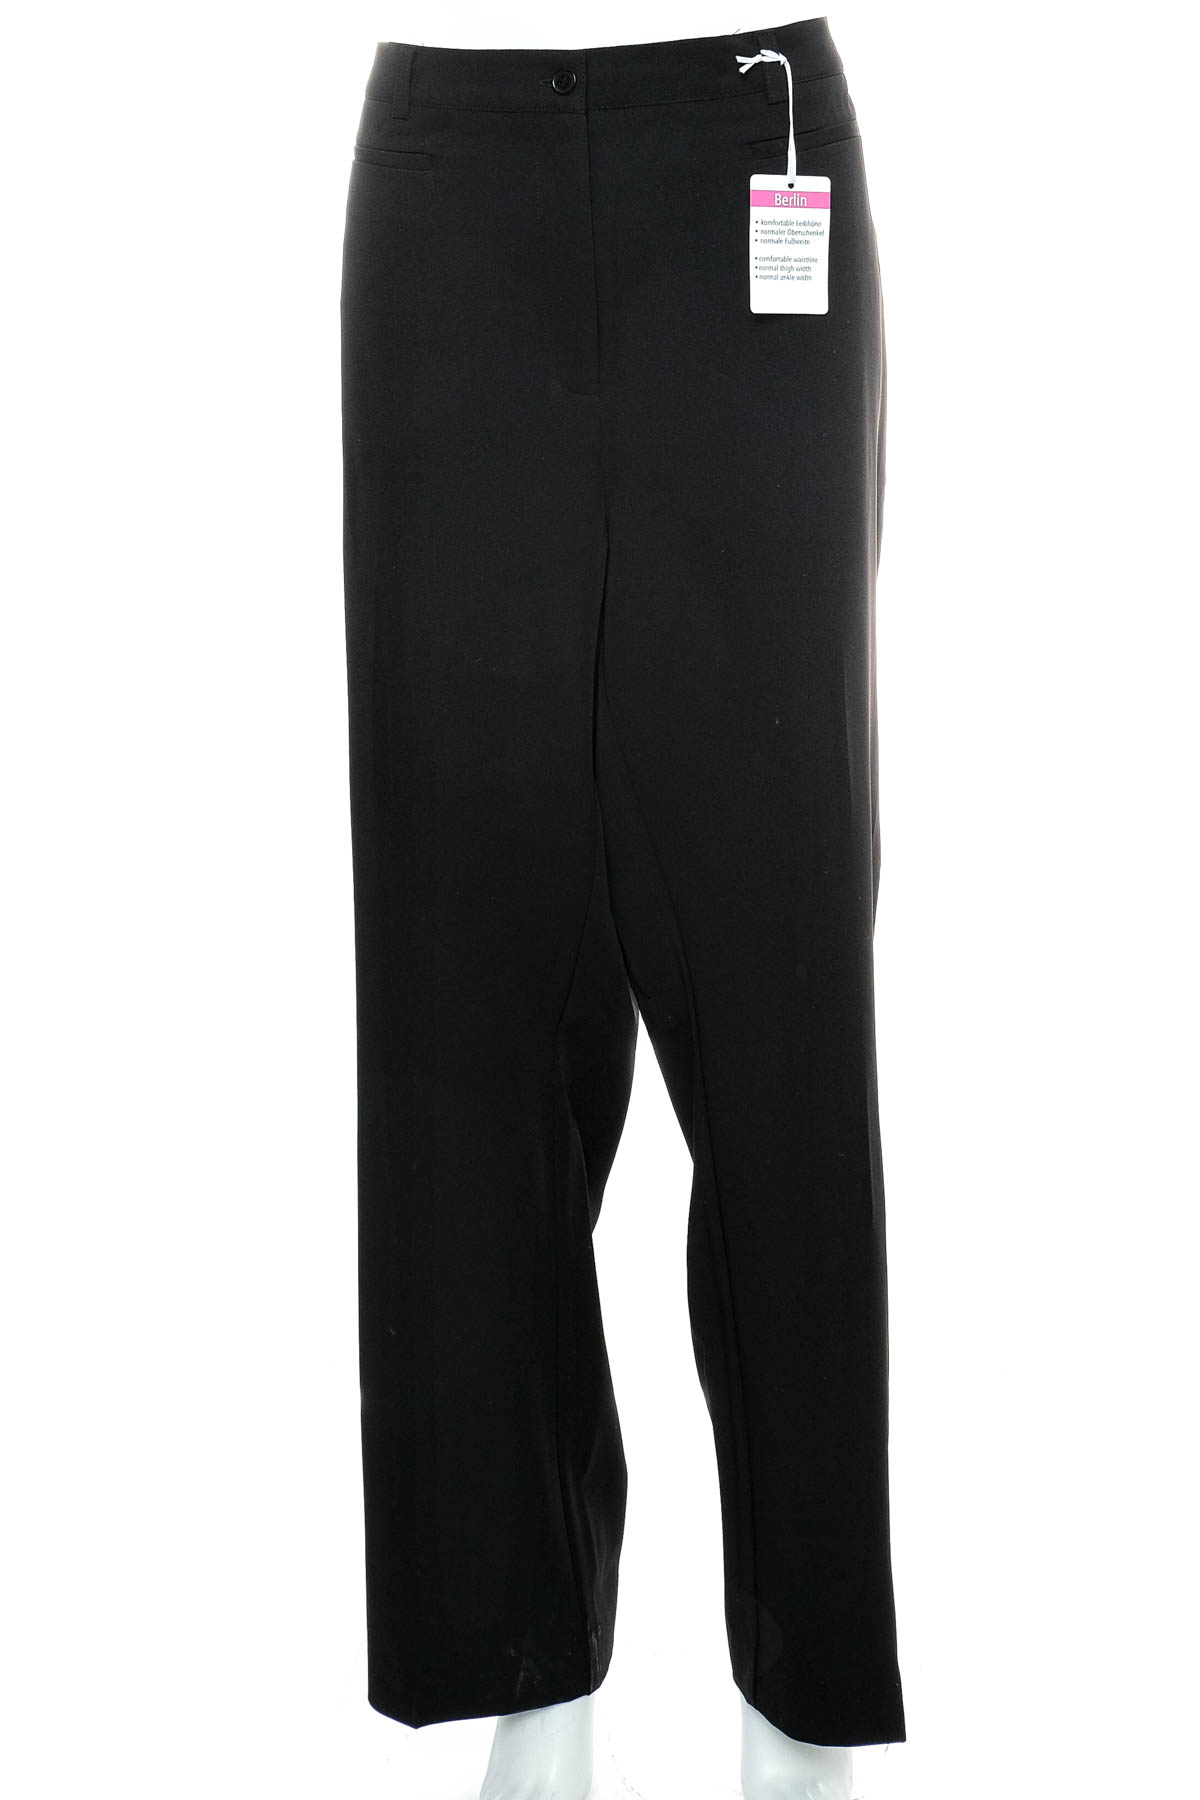 Women's trousers - AproductZ - 0